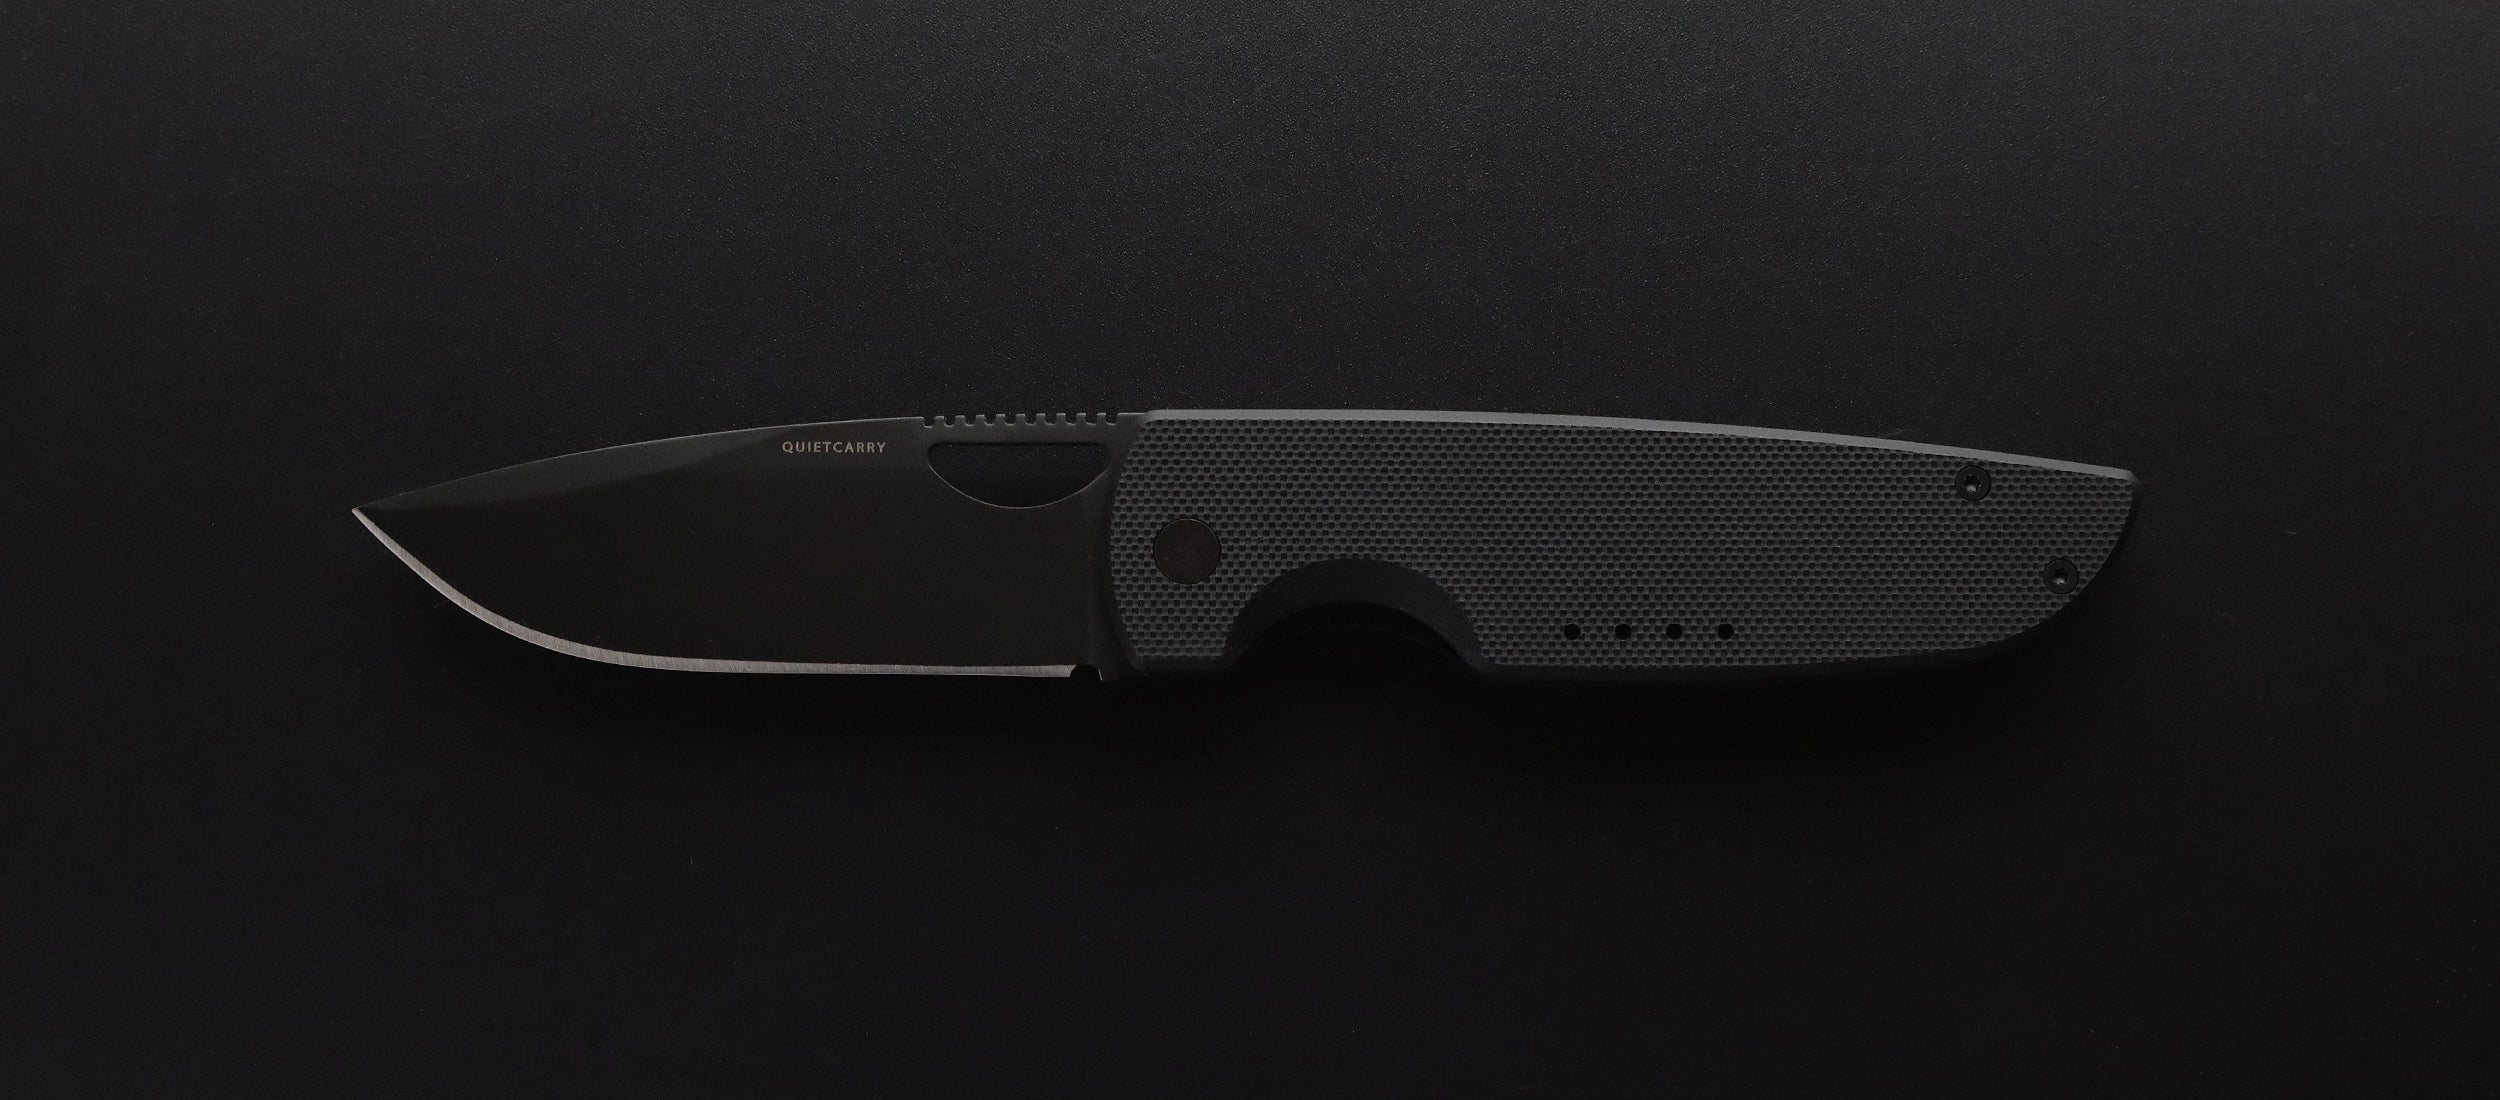 The Chase Black PVD G10 CPM 20CV - Quiet Carry